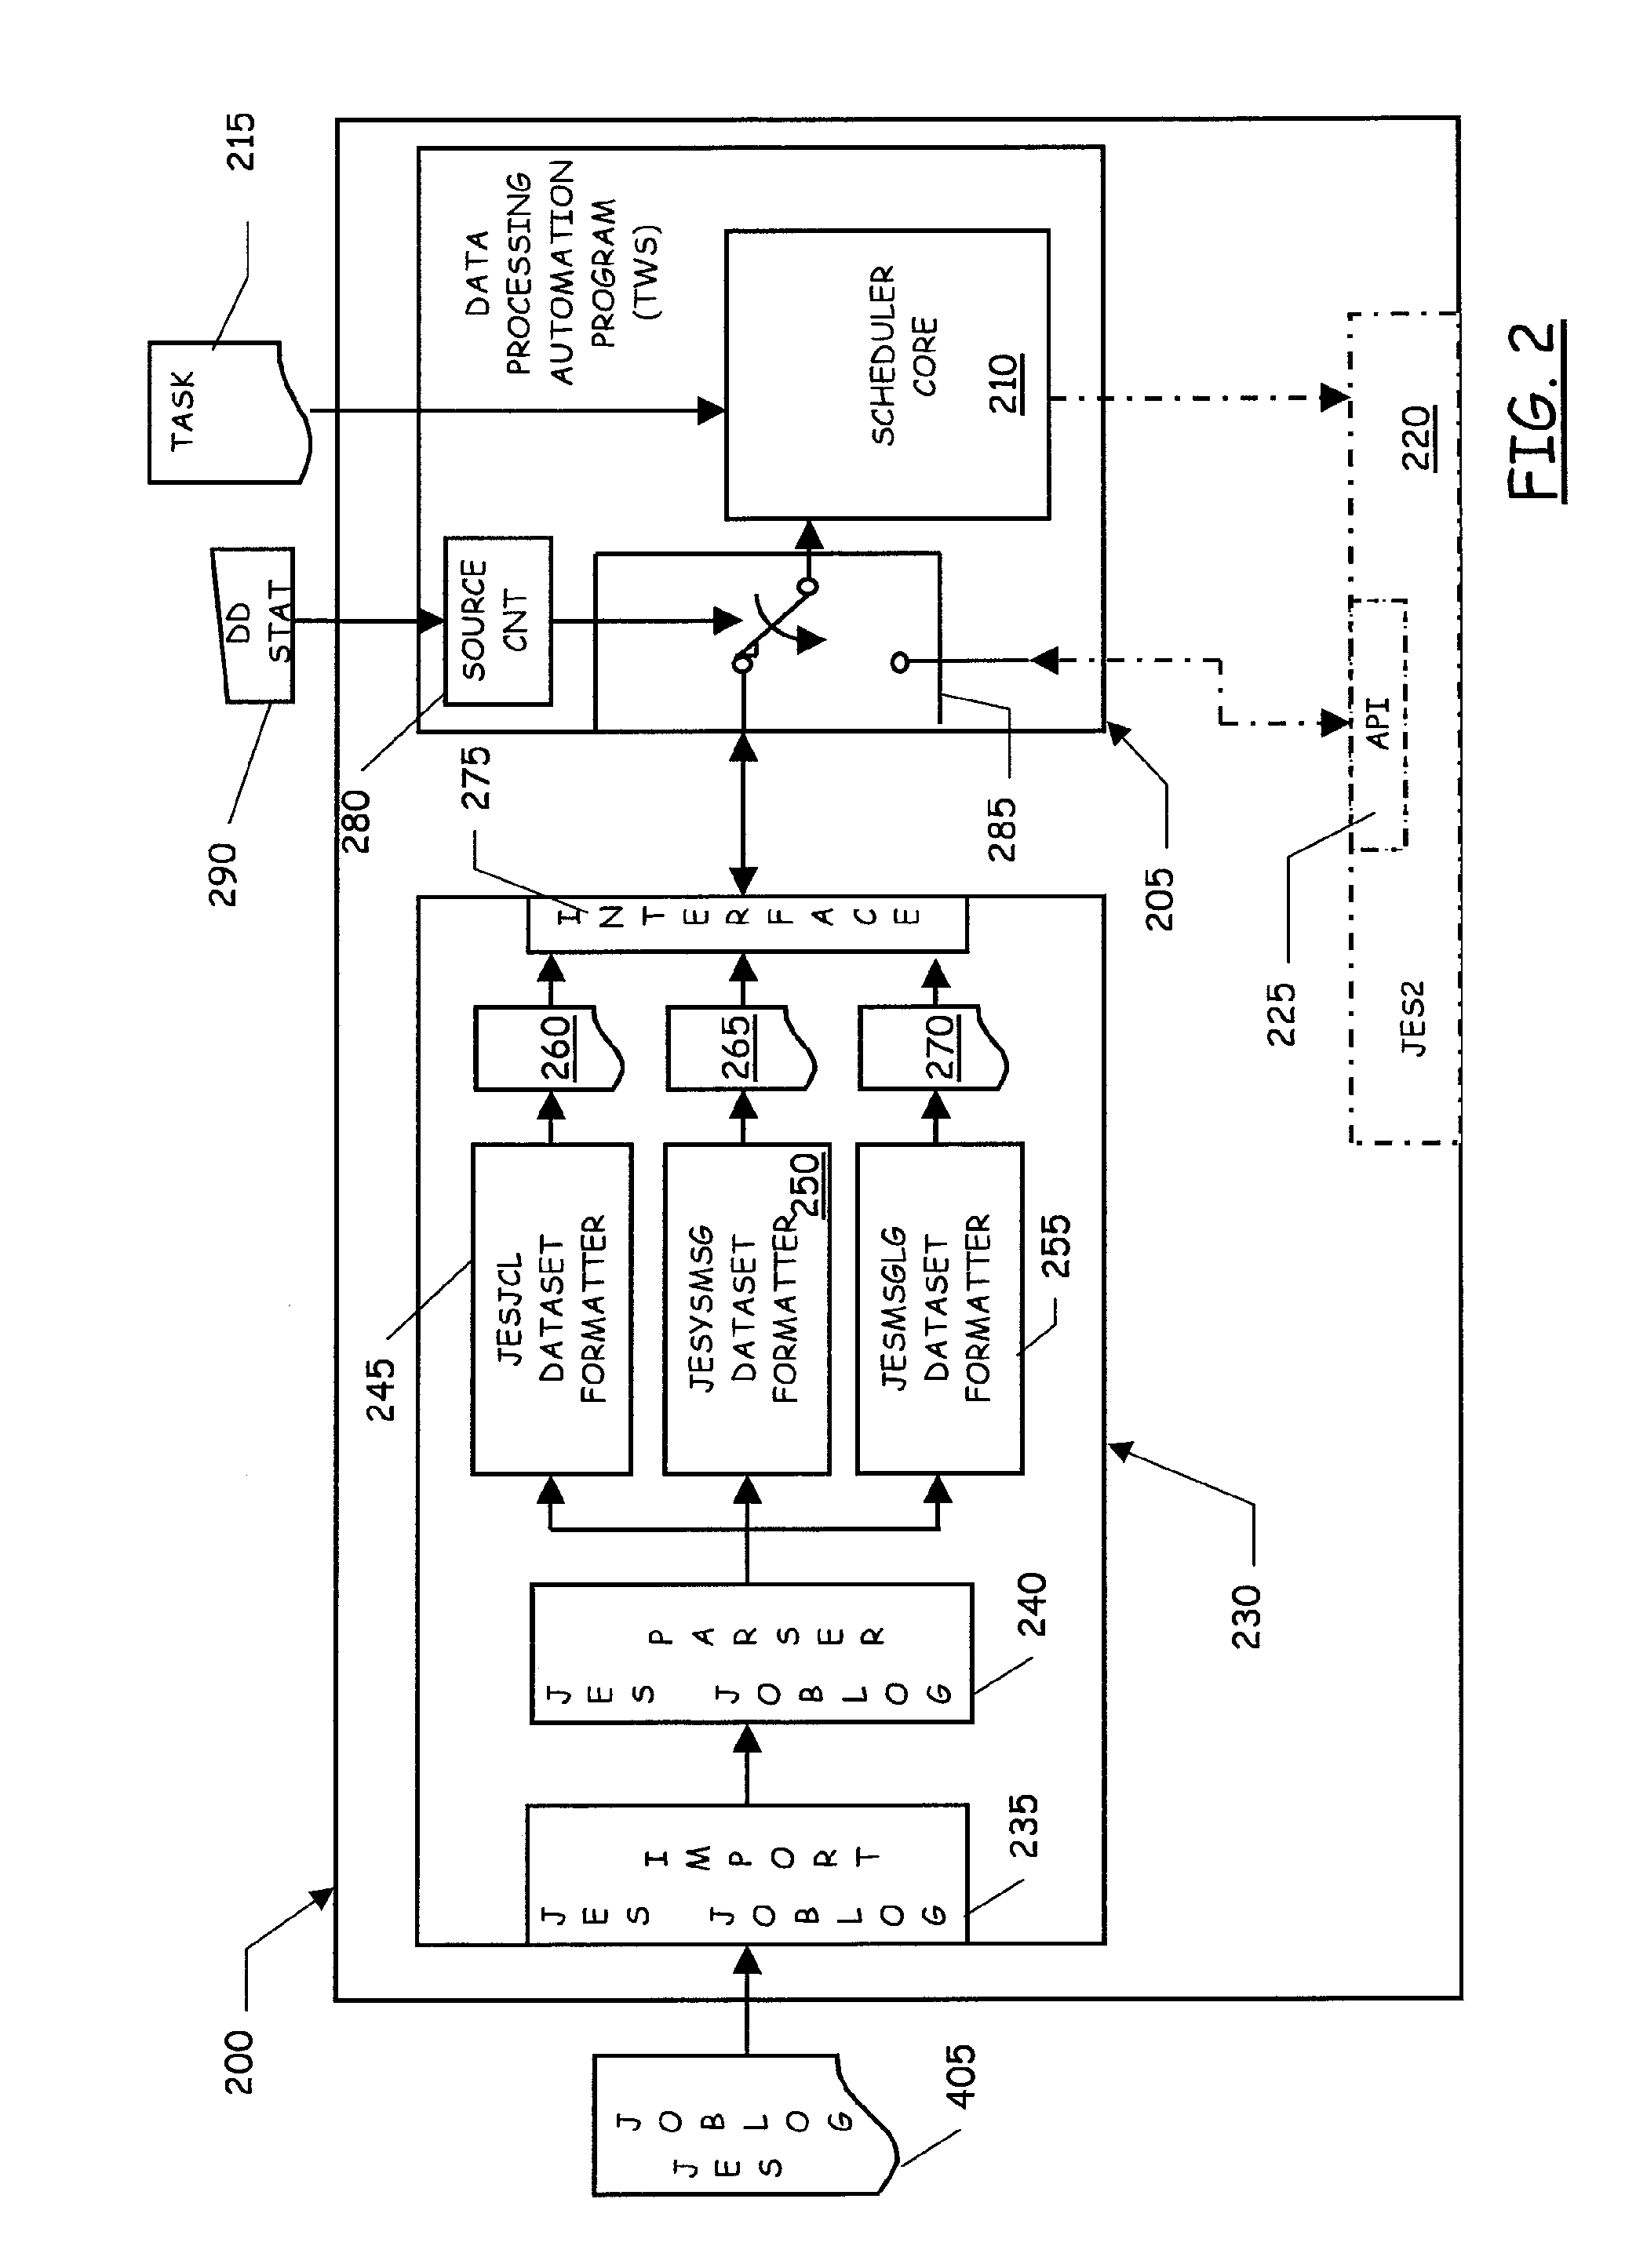 Method and system for simulating job entry subsystem (JES) operation